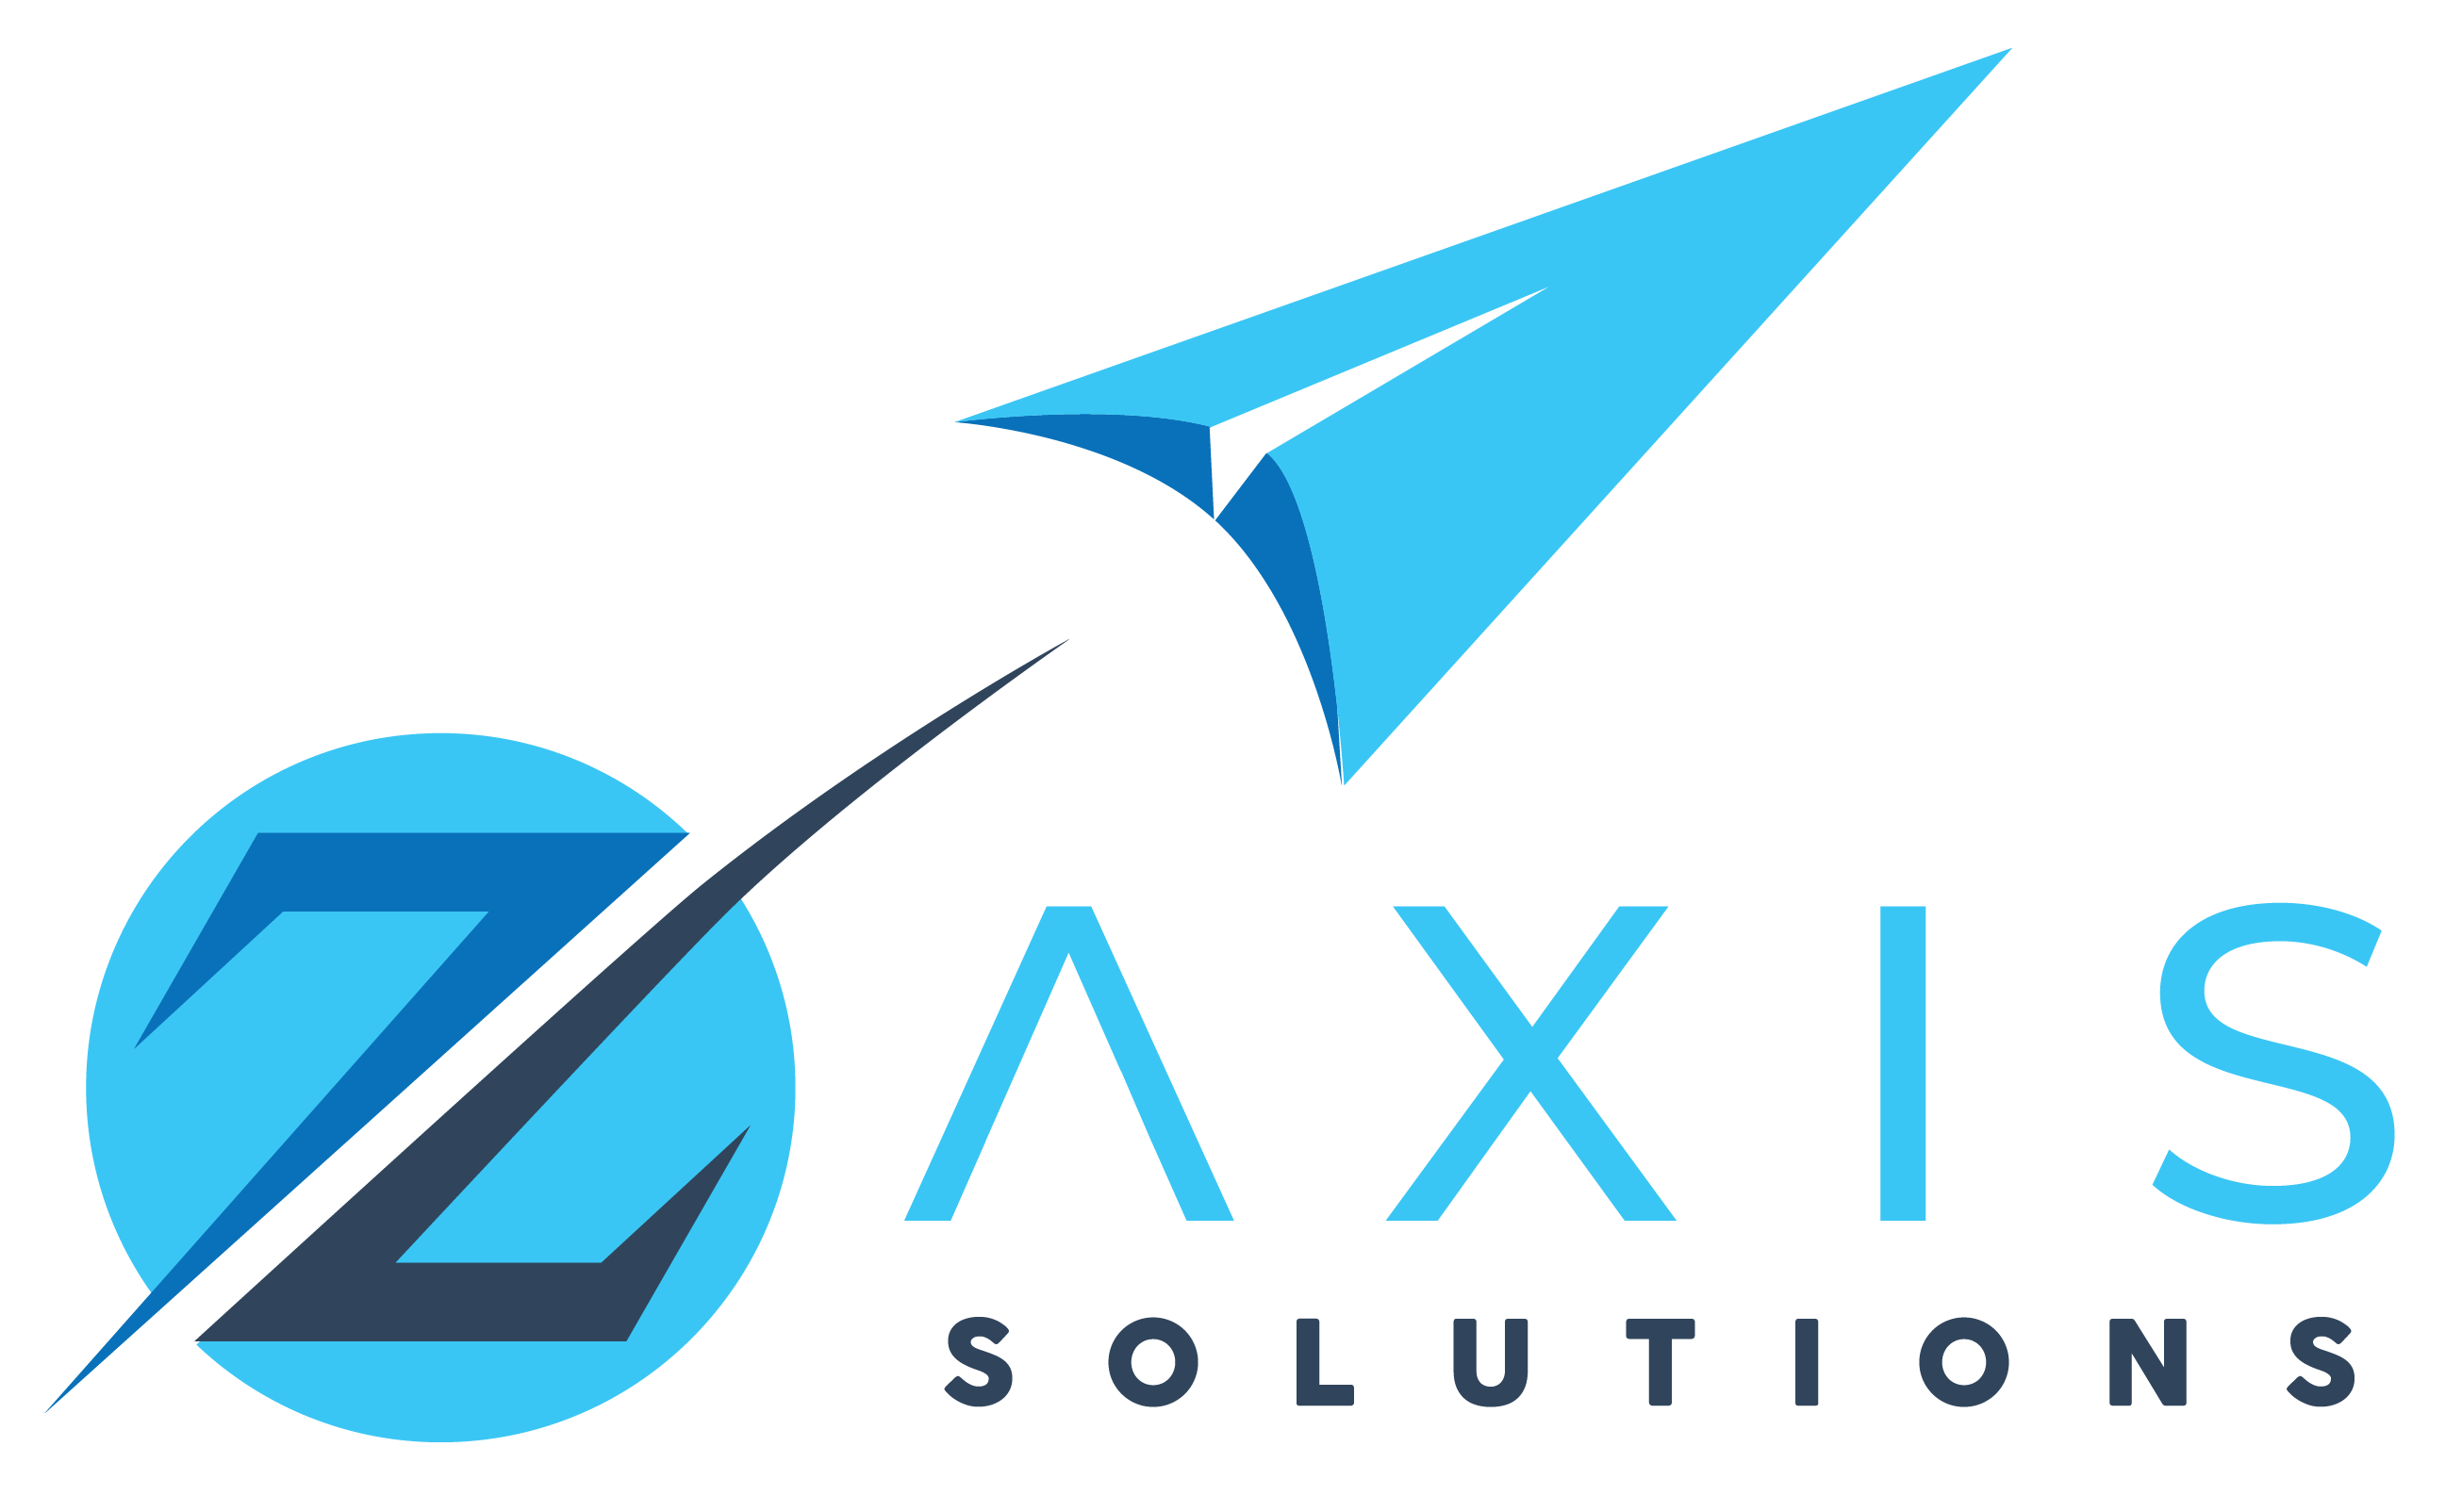 Z Axis Solutions Guarantees Results with their Innovative Lead Generation Program